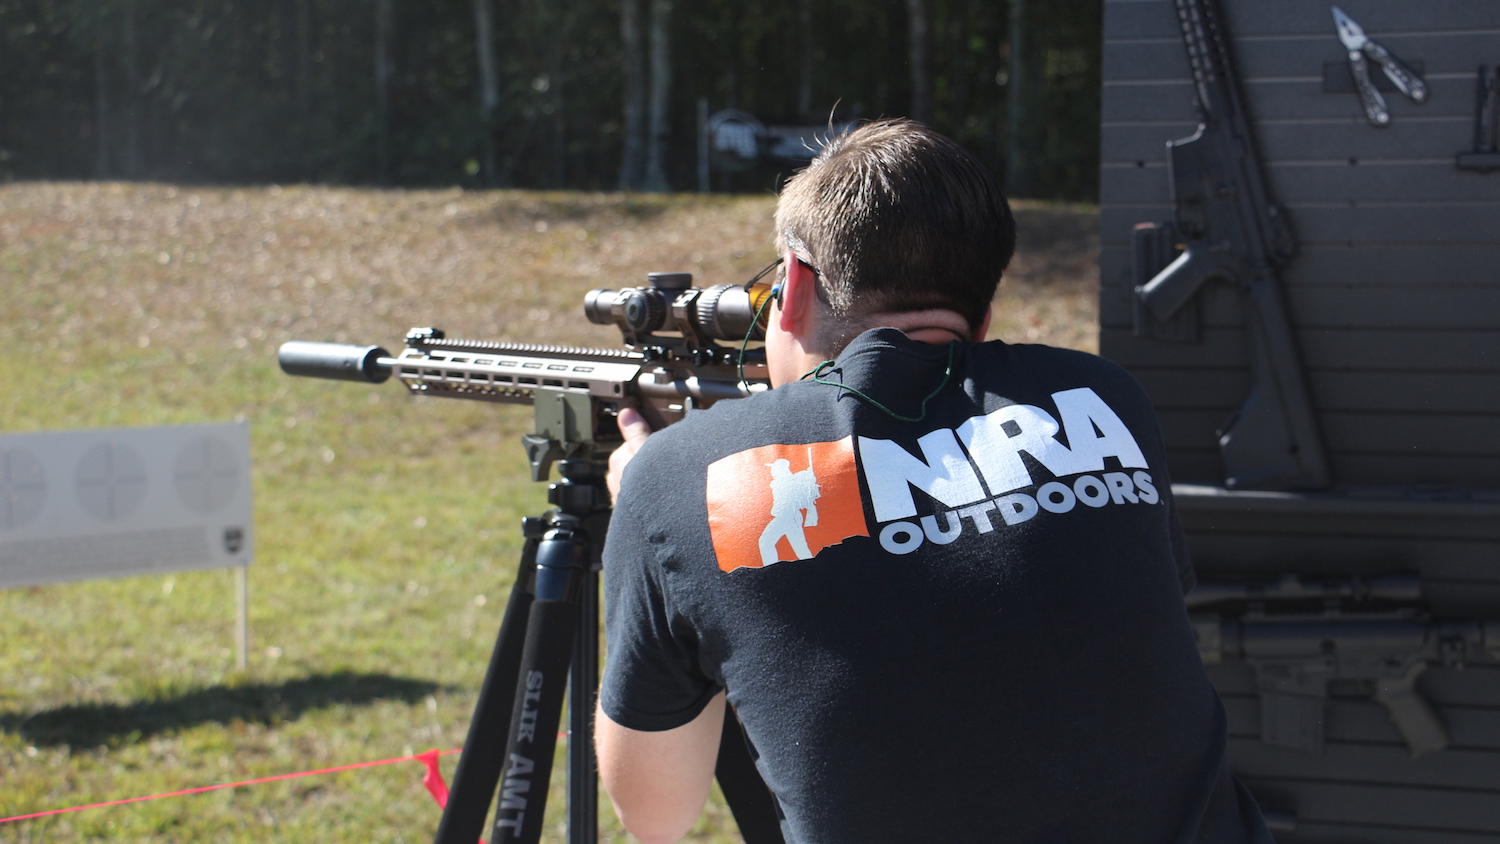 Finding a Second Family in the Shooting Sports Community